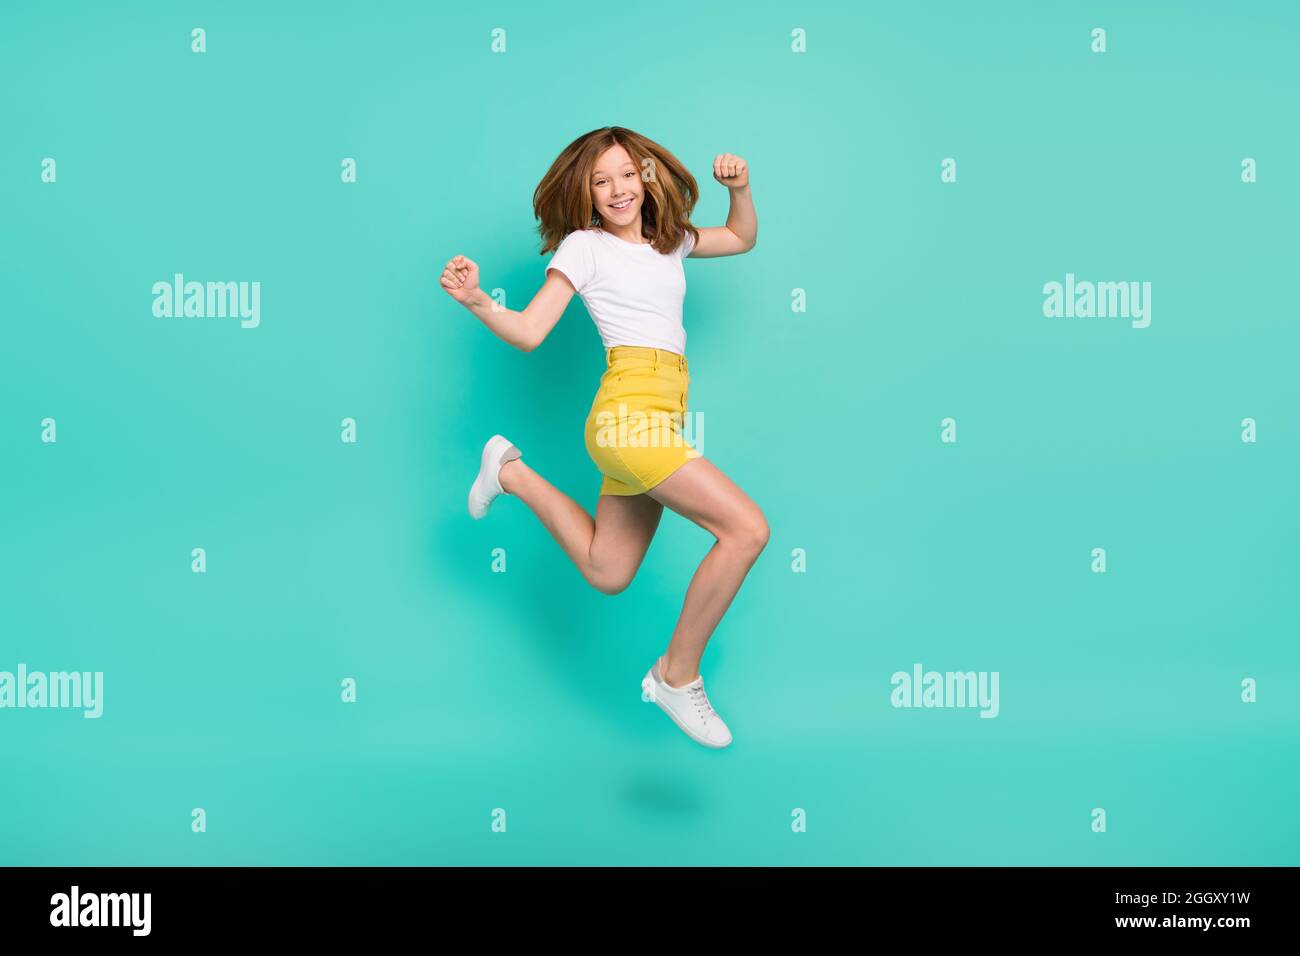 Full length body size photo schoolgirl jumping up gesturing like winner isolated vivid teal color background Stock Photo